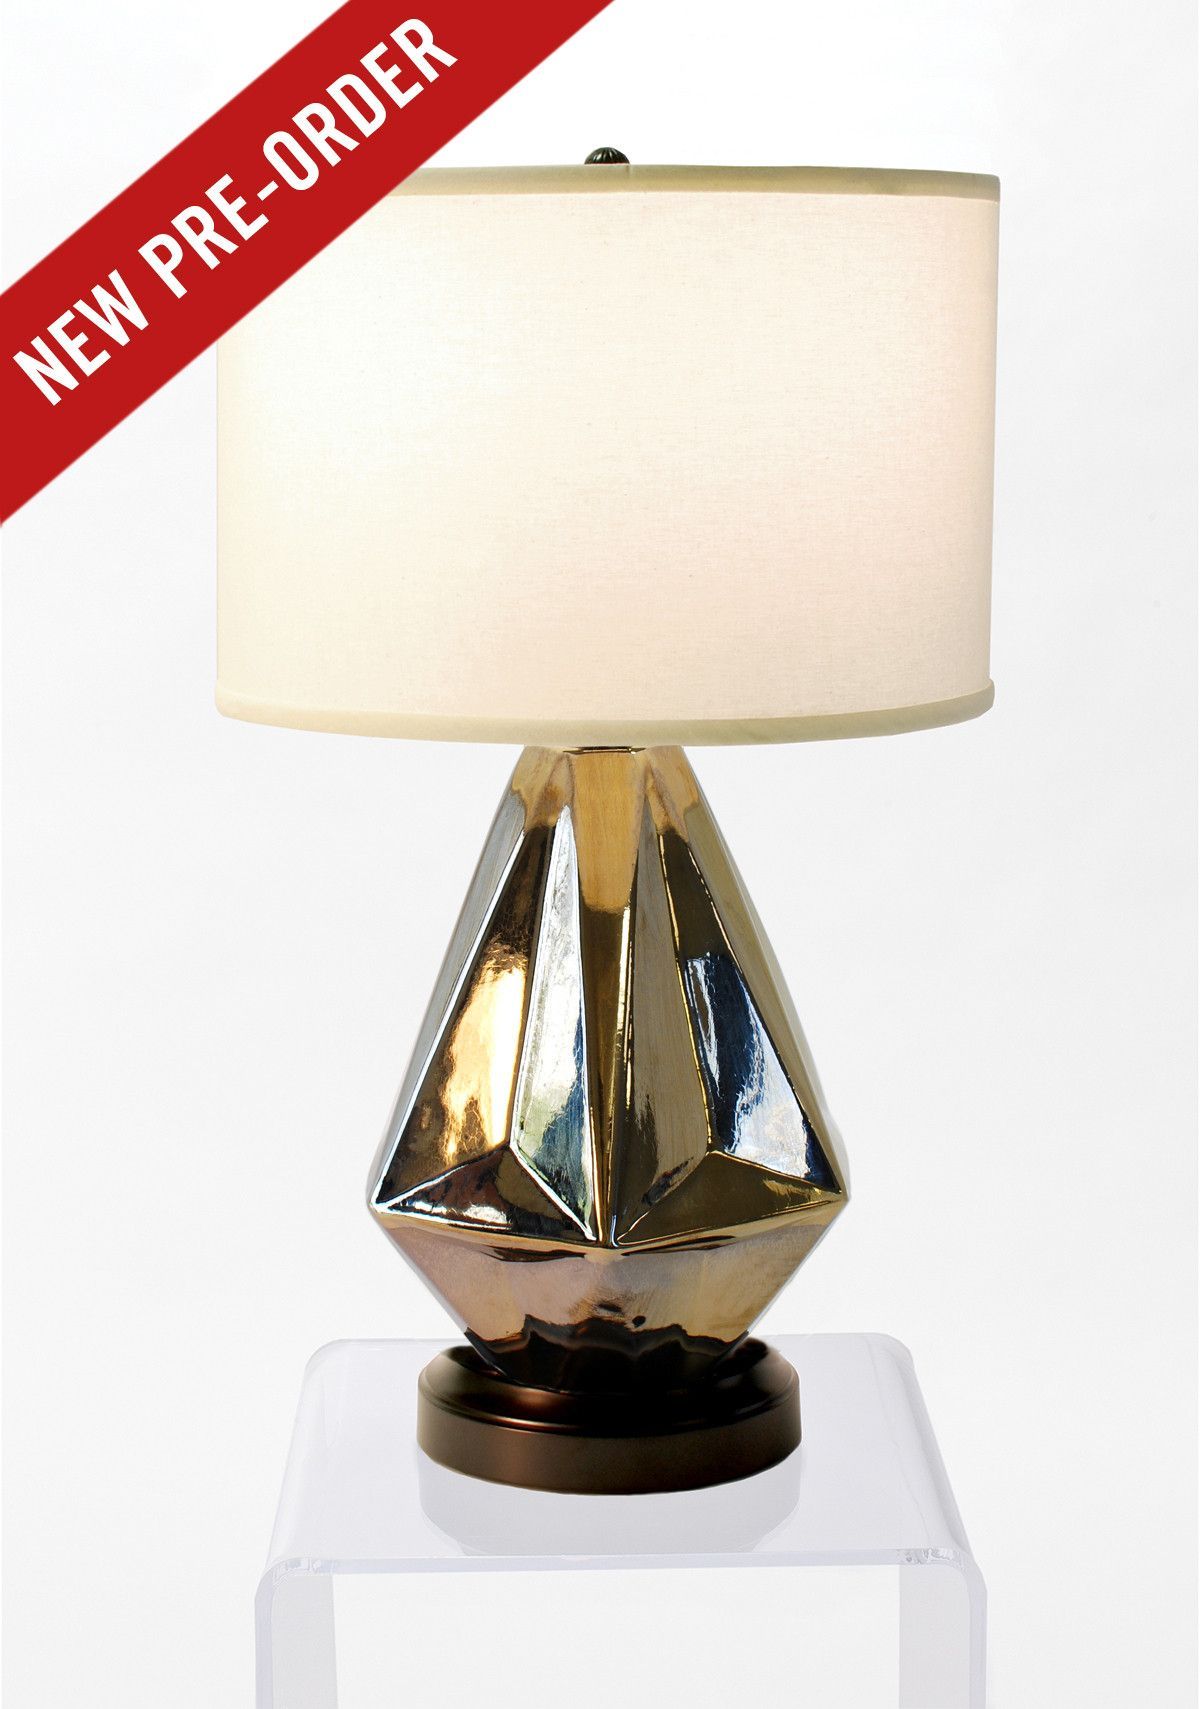 Prisma Bronze Cordless Lamp - Made in the USA | Cordless lamps ...